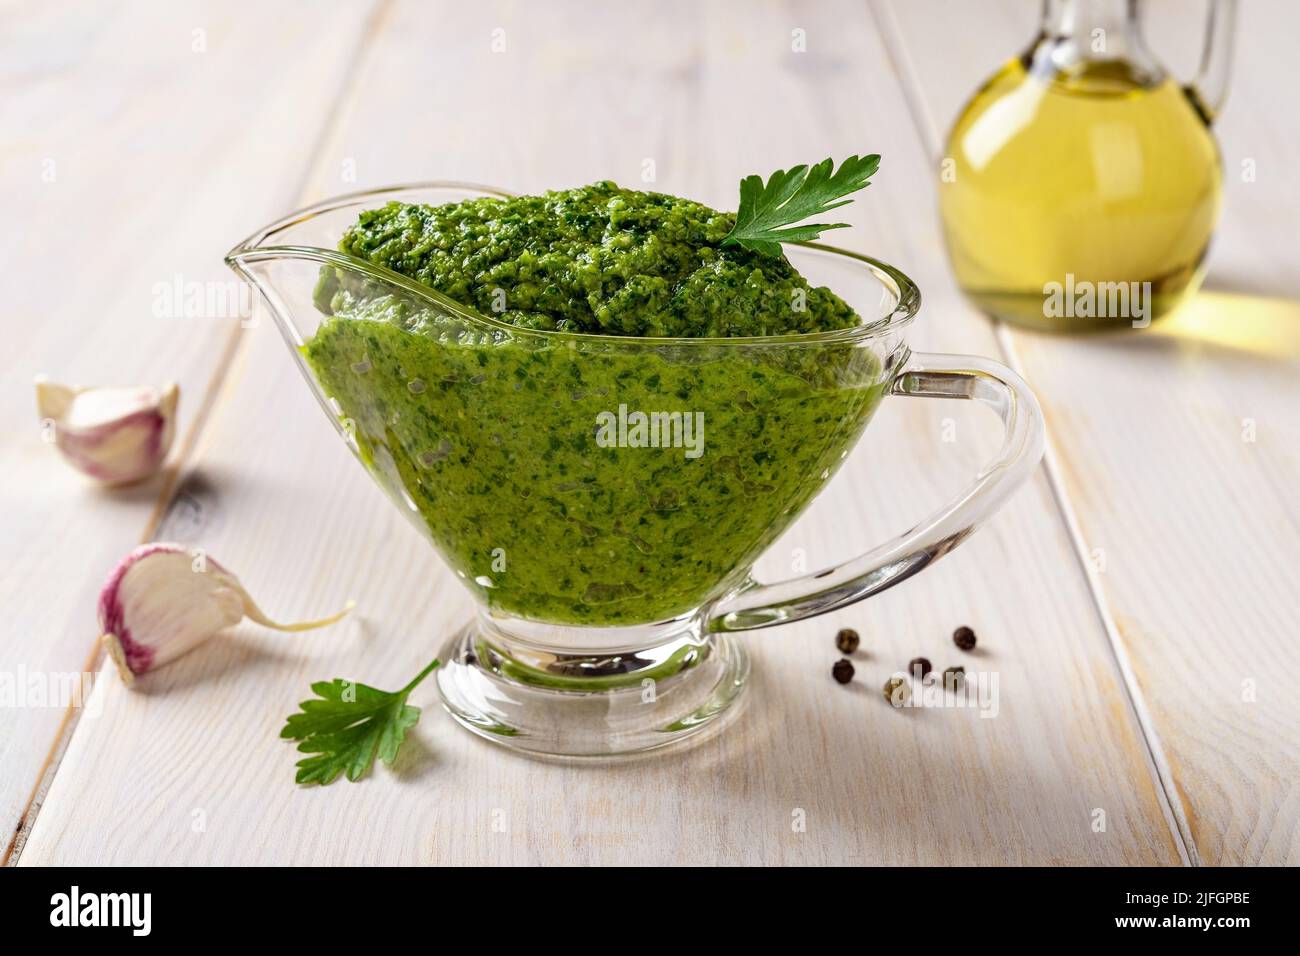 Green sauce in a gravy boat on a table. Chimichurri dipping sauce from fresh parsley, garlic cloves, olive oil and lemon juice. Salsa verde. Front vie Stock Photo